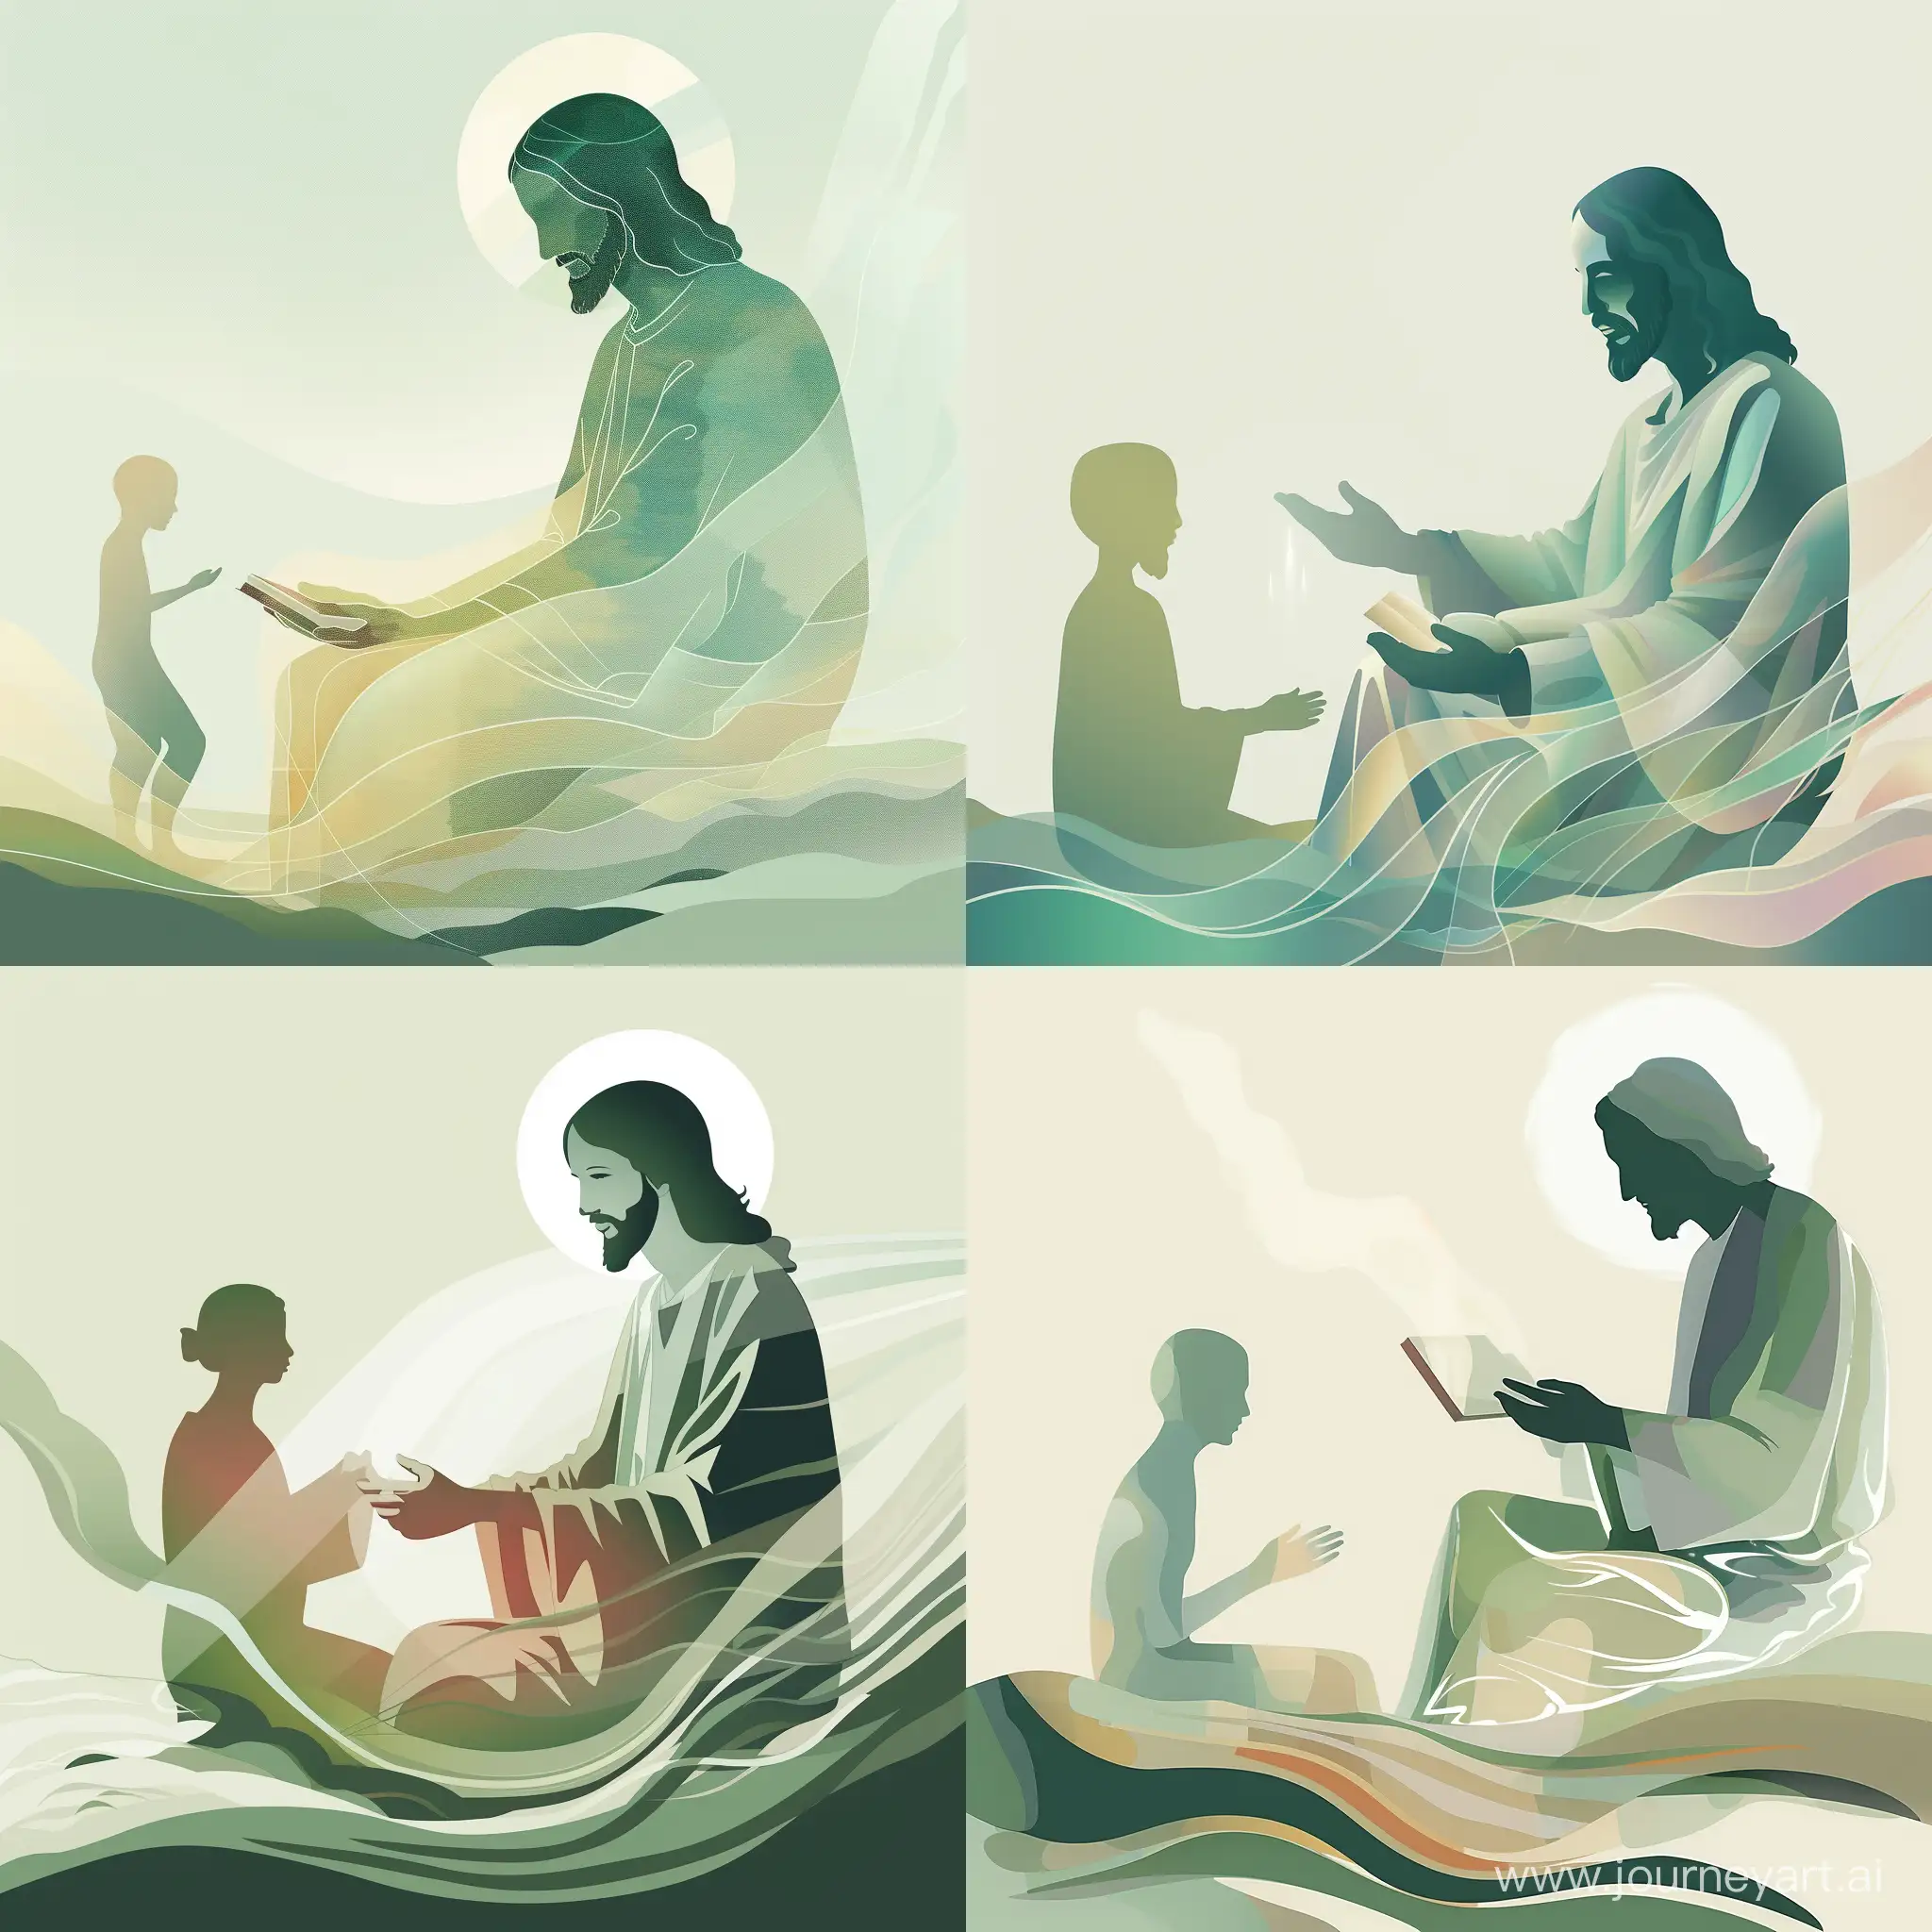 The digital artwork should be horizontally oriented to fit ideally on a web page. The overall color palette should consist of soft hues of greens, creams, and whites, providing a serene and peaceful backdrop.

Jesus Christ, as the central figure, is placed slightly to the right of the center. He is depicted as a stylized silhouette filled with calming colors. The figure is seated, wearing a simple robe, with one hand resting on an open book in his lap. The book should be clearly identifiable but subtly incorporated. 

His face is gently illuminated, with a soft, warm light creating a subtle halo around his head, giving a sense of divinity. The face should be peaceful and inviting, with a kind gaze directed towards the left side of the image.

On the left, closer to the edge of the image, is a smaller, abstract figure representing a person. This figure is simple and non-detailed, it could be depicted in mid-motion, reaching out towards the figure of Jesus, indicating a sense of seeking or reaching out for help.

The two figures are separated by a subtle gradient of light, originating from the figure of Jesus, hinting at a transfer of wisdom or healing energy from Jesus to the person. 

The bottom of the image could contain a faint silhouette of a peaceful landscape - perhaps rolling hills or a calm sea, to maintain a serene and calming atmosphere. 

In essence, the image is a modern, stylized representation of Jesus Christ as a therapist, interacting with a person seeking help, set against a serene, calming background.